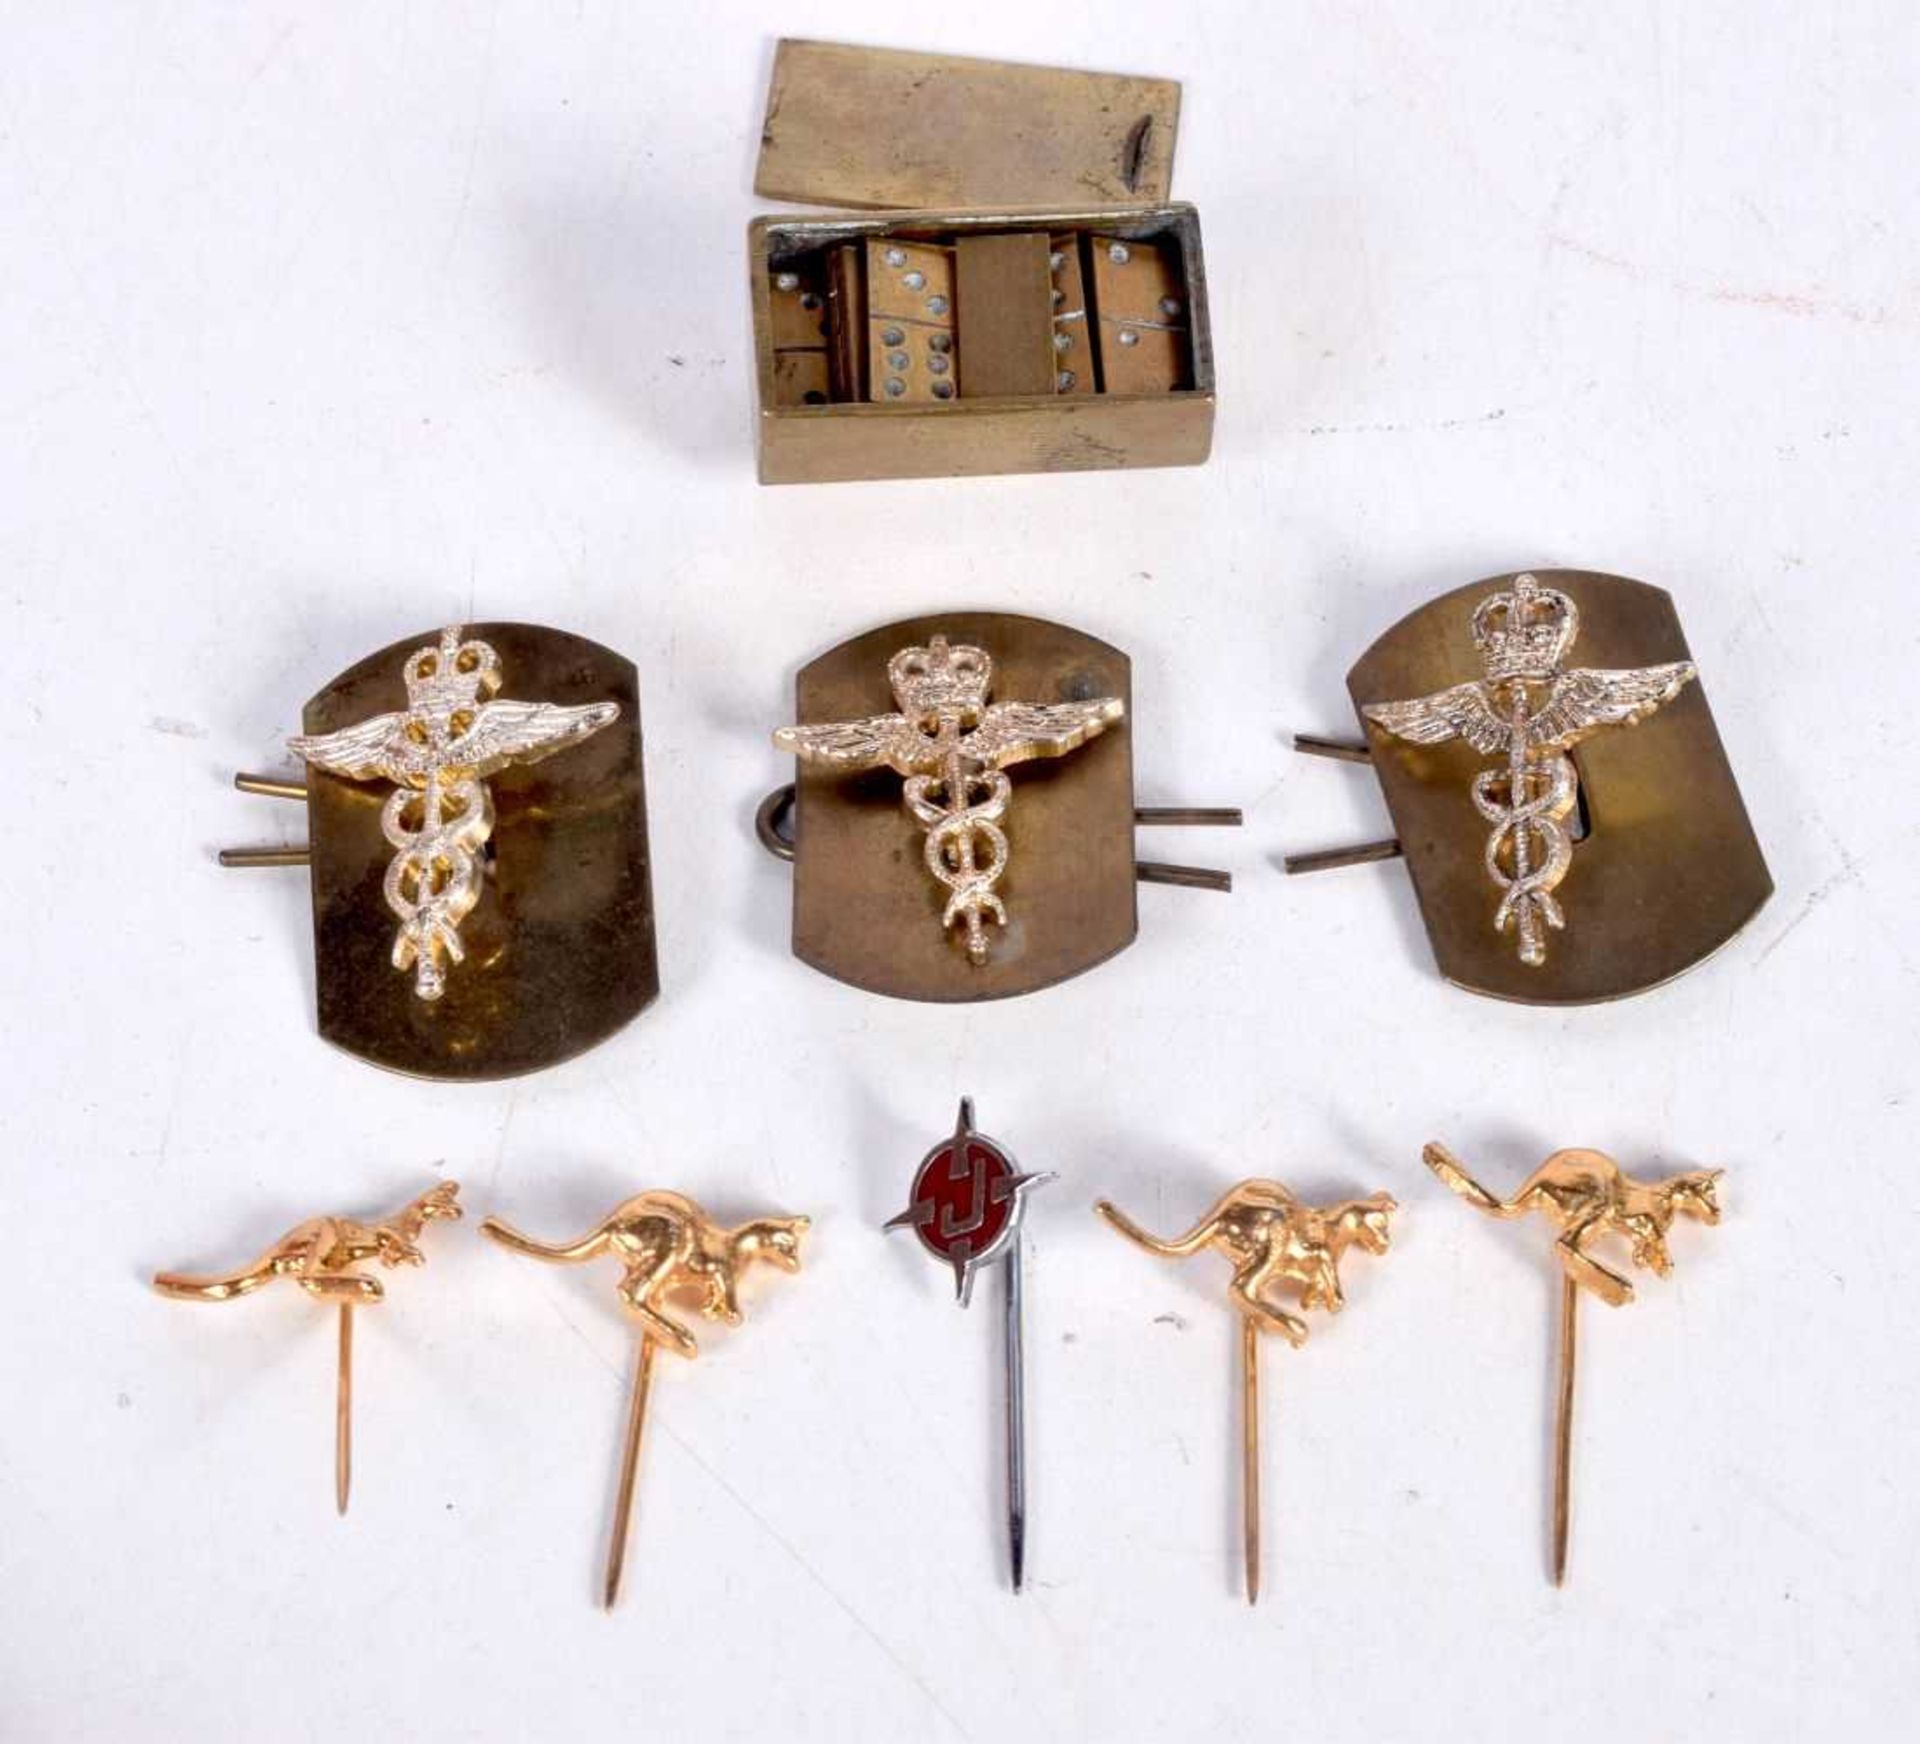 THREE ROYAL AIR FORCE MEDICAL CORPS LAPEL BADGES TOGETHER WITH 4 KANGAROO LAPEL PINS, A MINIATURE